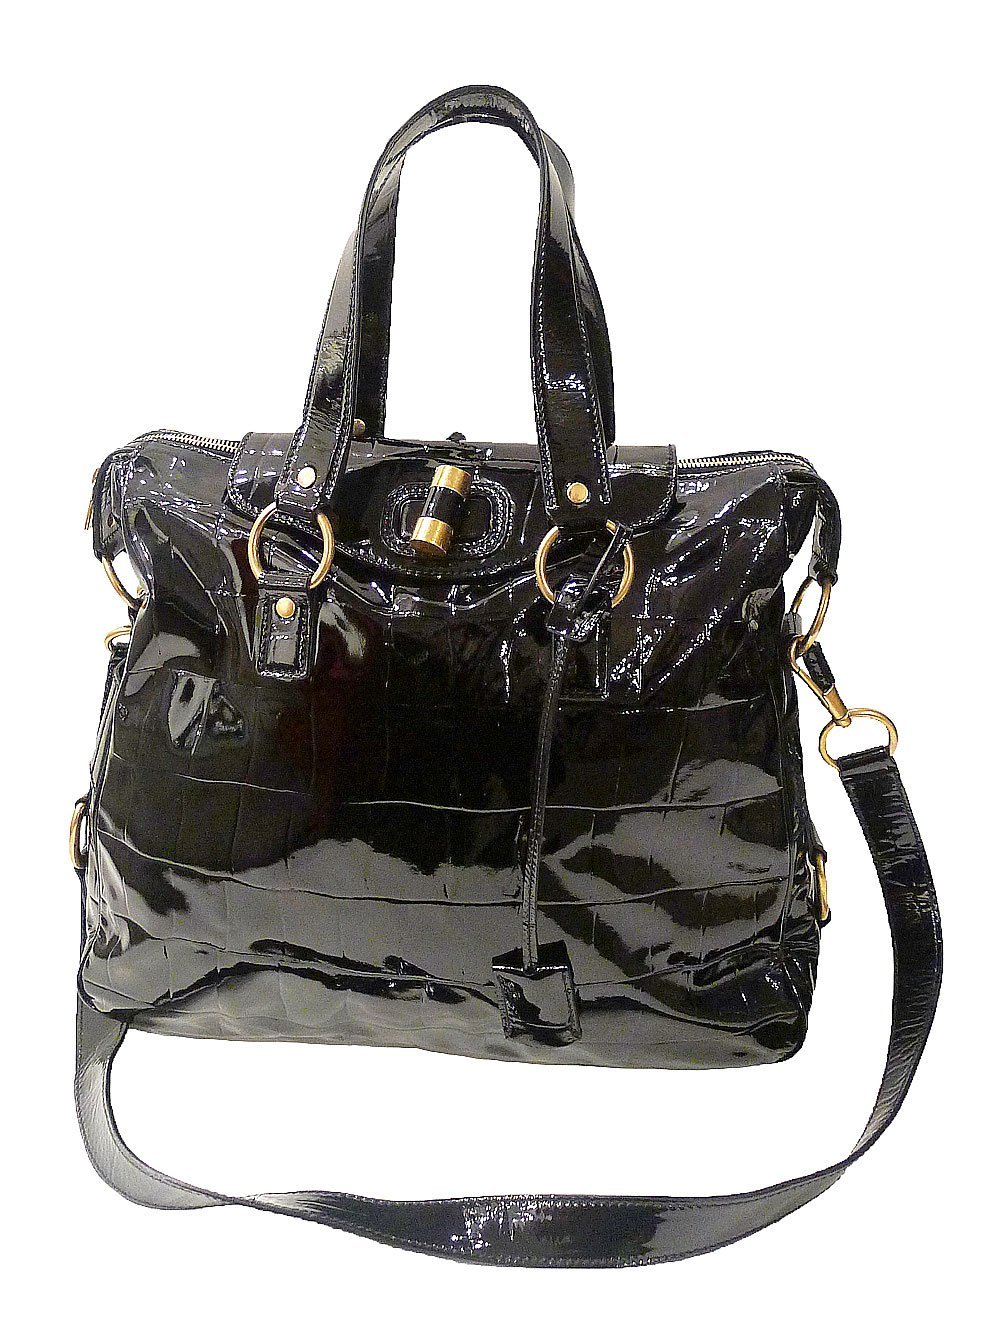 Purse Quote - Yves Saint Laurent YSL Black Patent Leather Tote